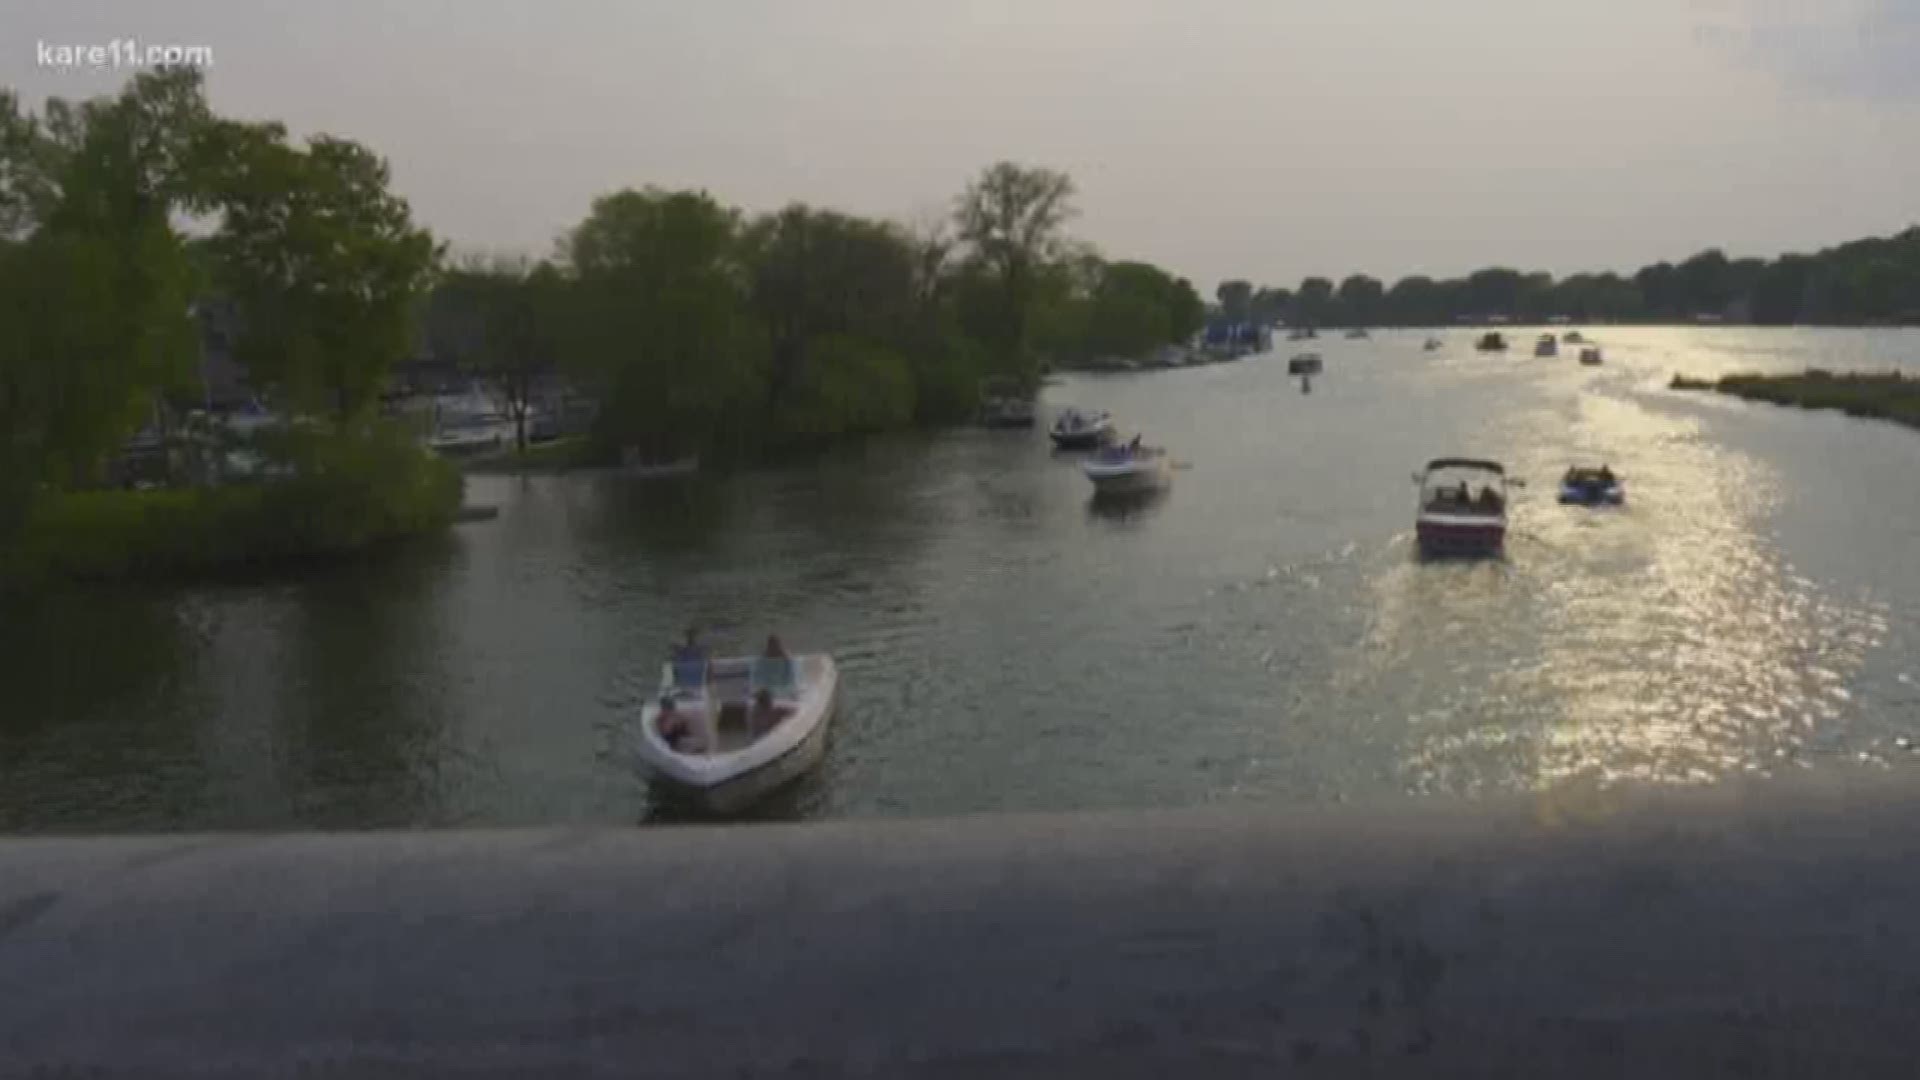 The high water declaration will take effect on Lake Minnetonka and several other popular lakes Friday, triggering slow or no wake zones until levels recede.